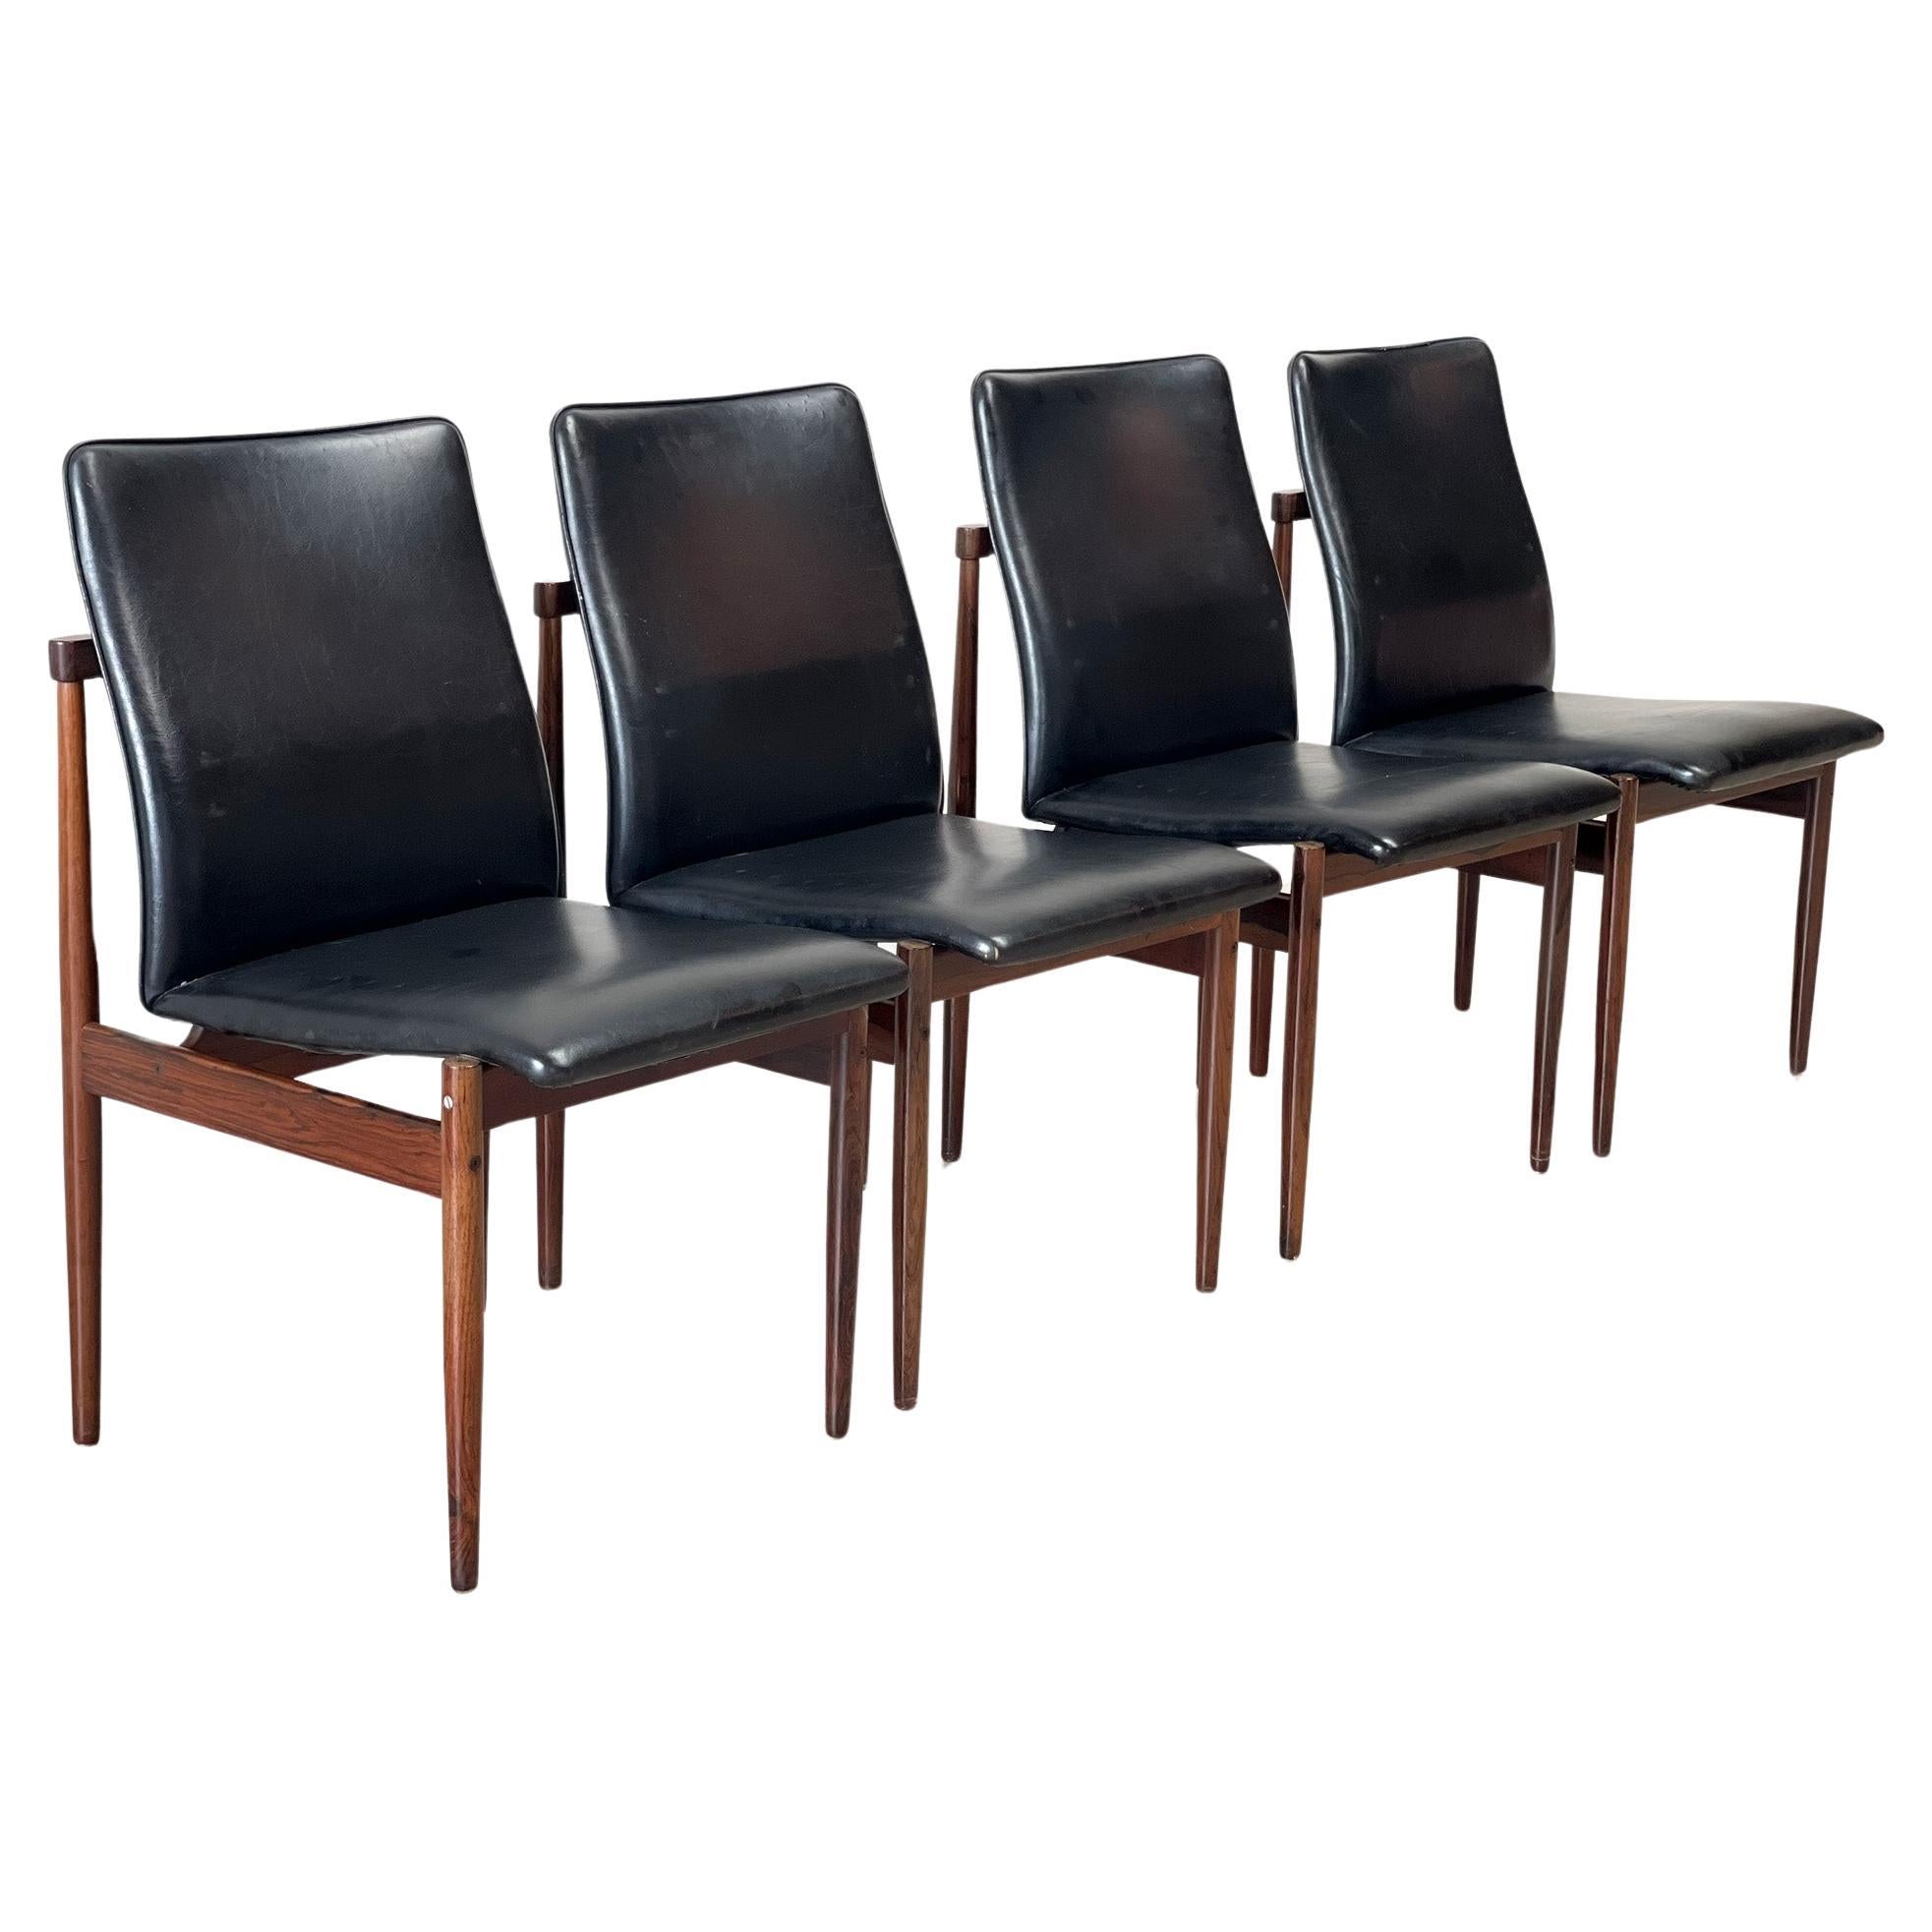 Four dining chairs by Inger Klingenberg for Fristho